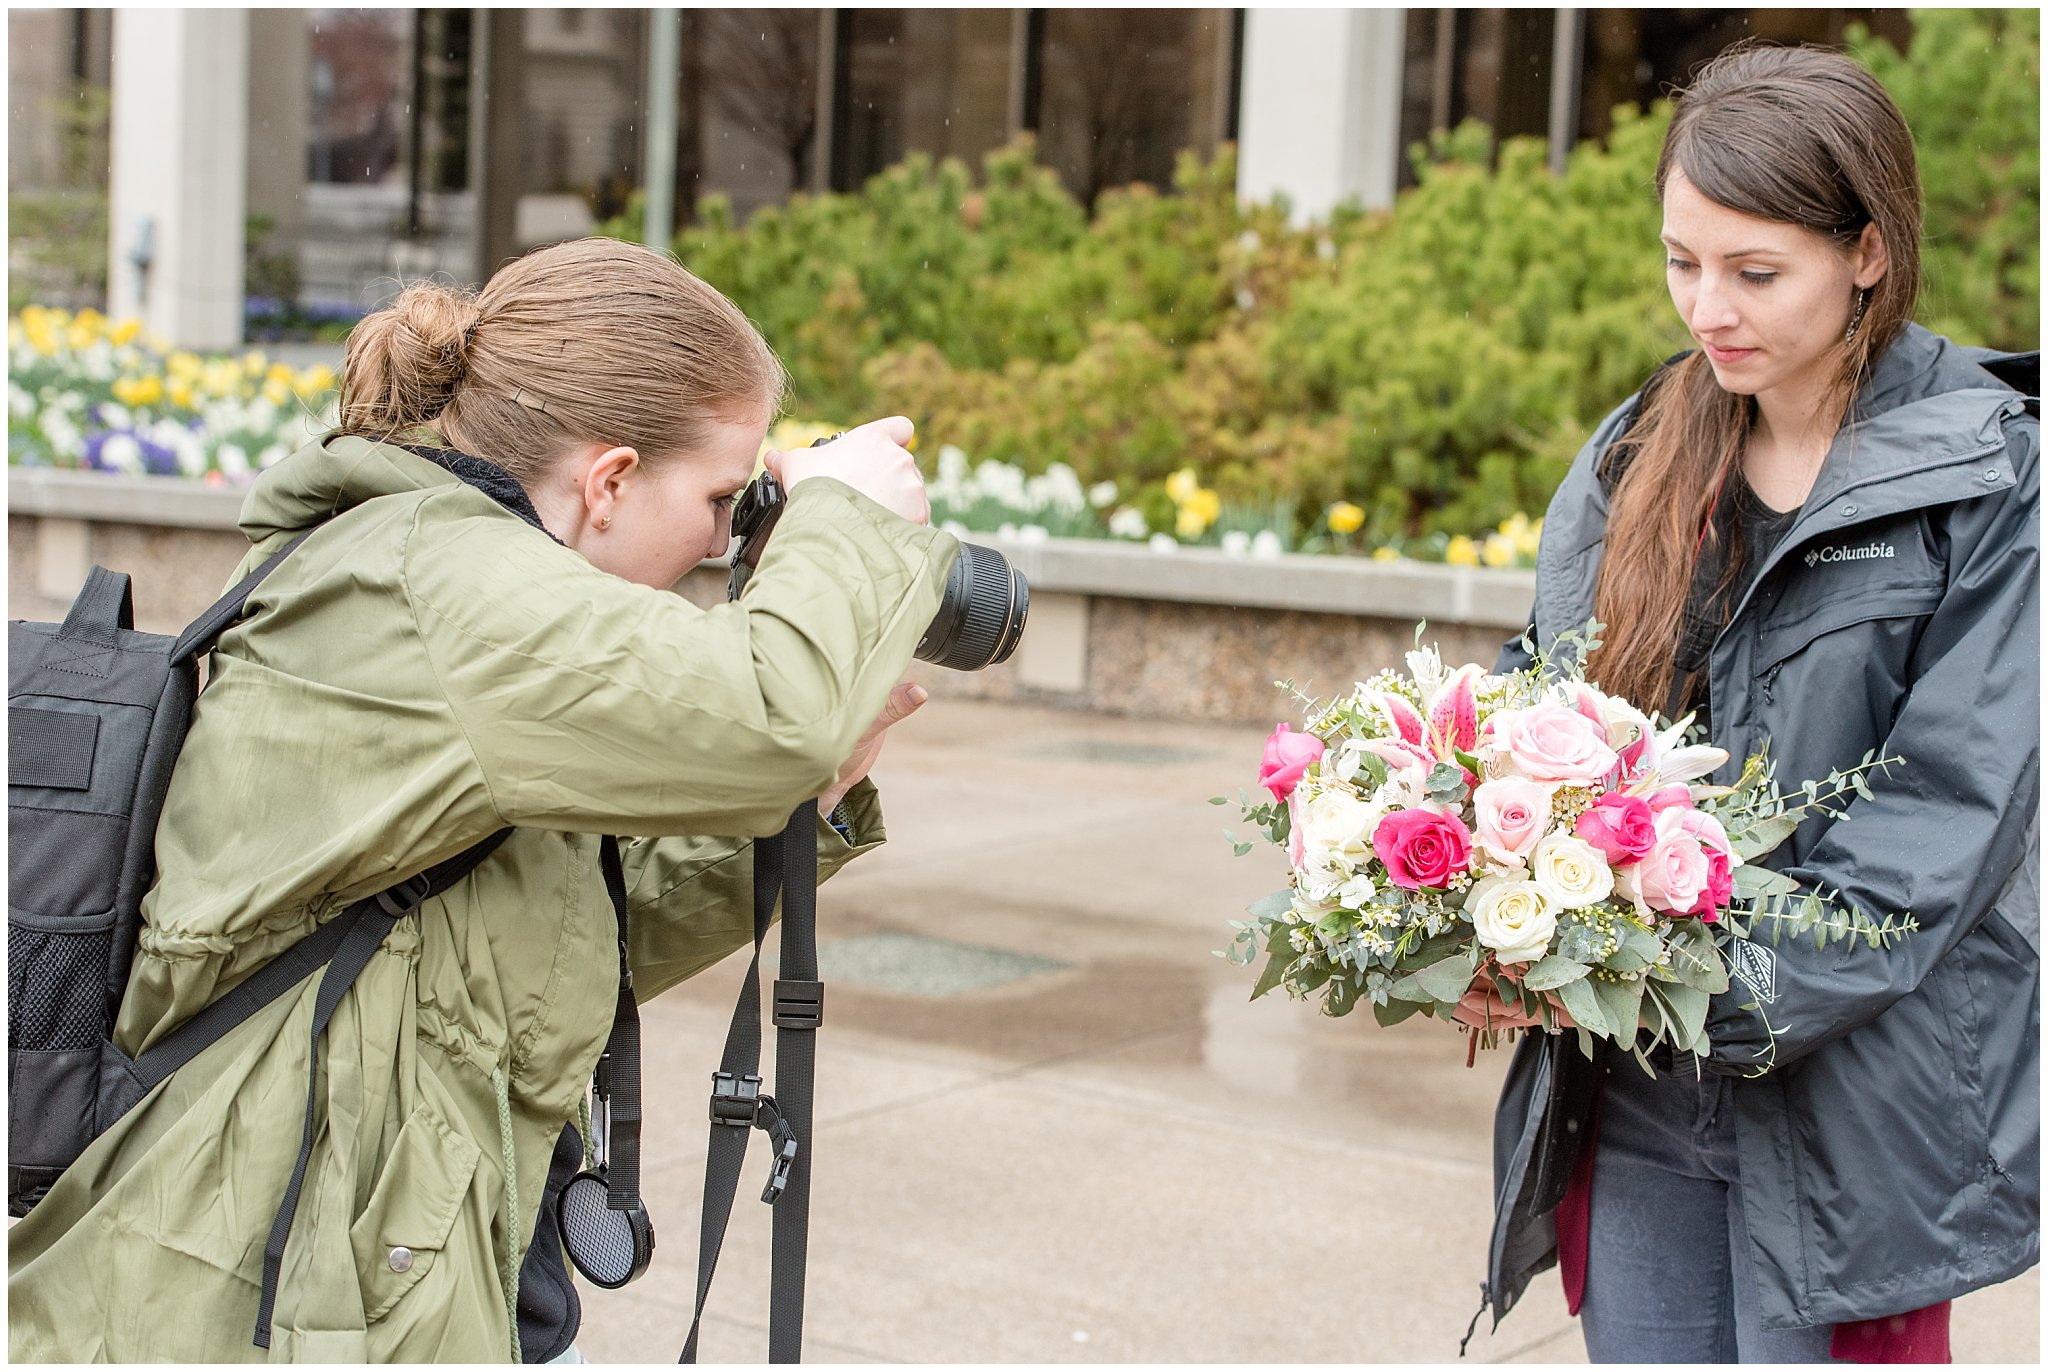 Utah photographers at the Salt Lake Temple | Husband and Wife Photography Team | Jessie and Dallin Photography